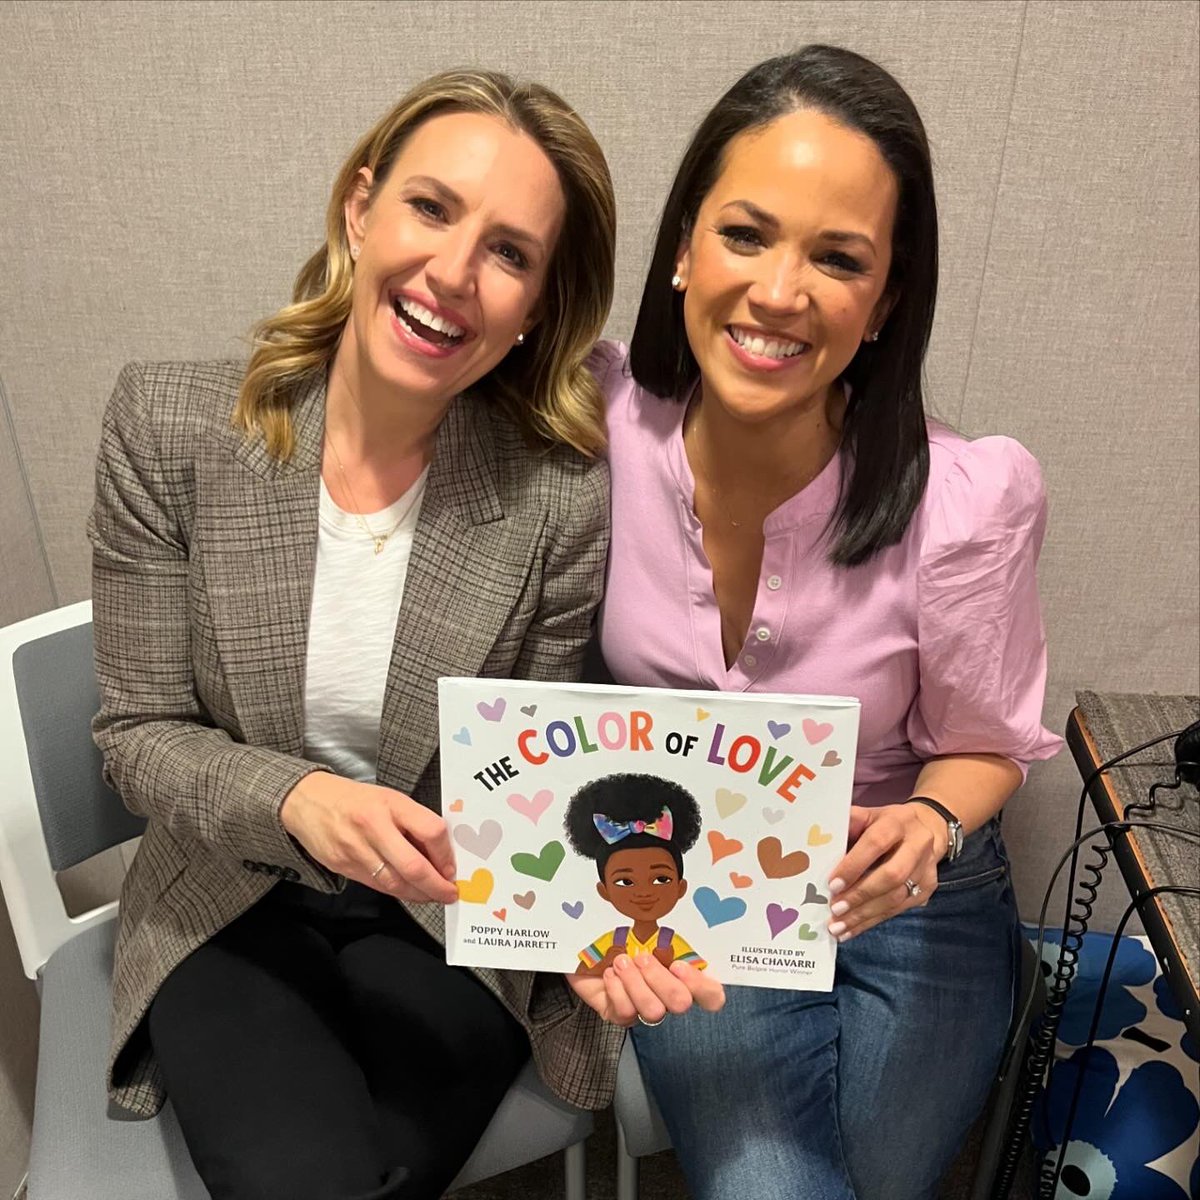 Joy and LOVE! Something special coming your way from me and my dear friend @LauraAJarrett! We can’t wait to share our new book “The Color of Love” with you on May 14th 💜💛💚🩵🩷❤️🧡🤎 Pre-order now! @prhaudio @elisachavarri